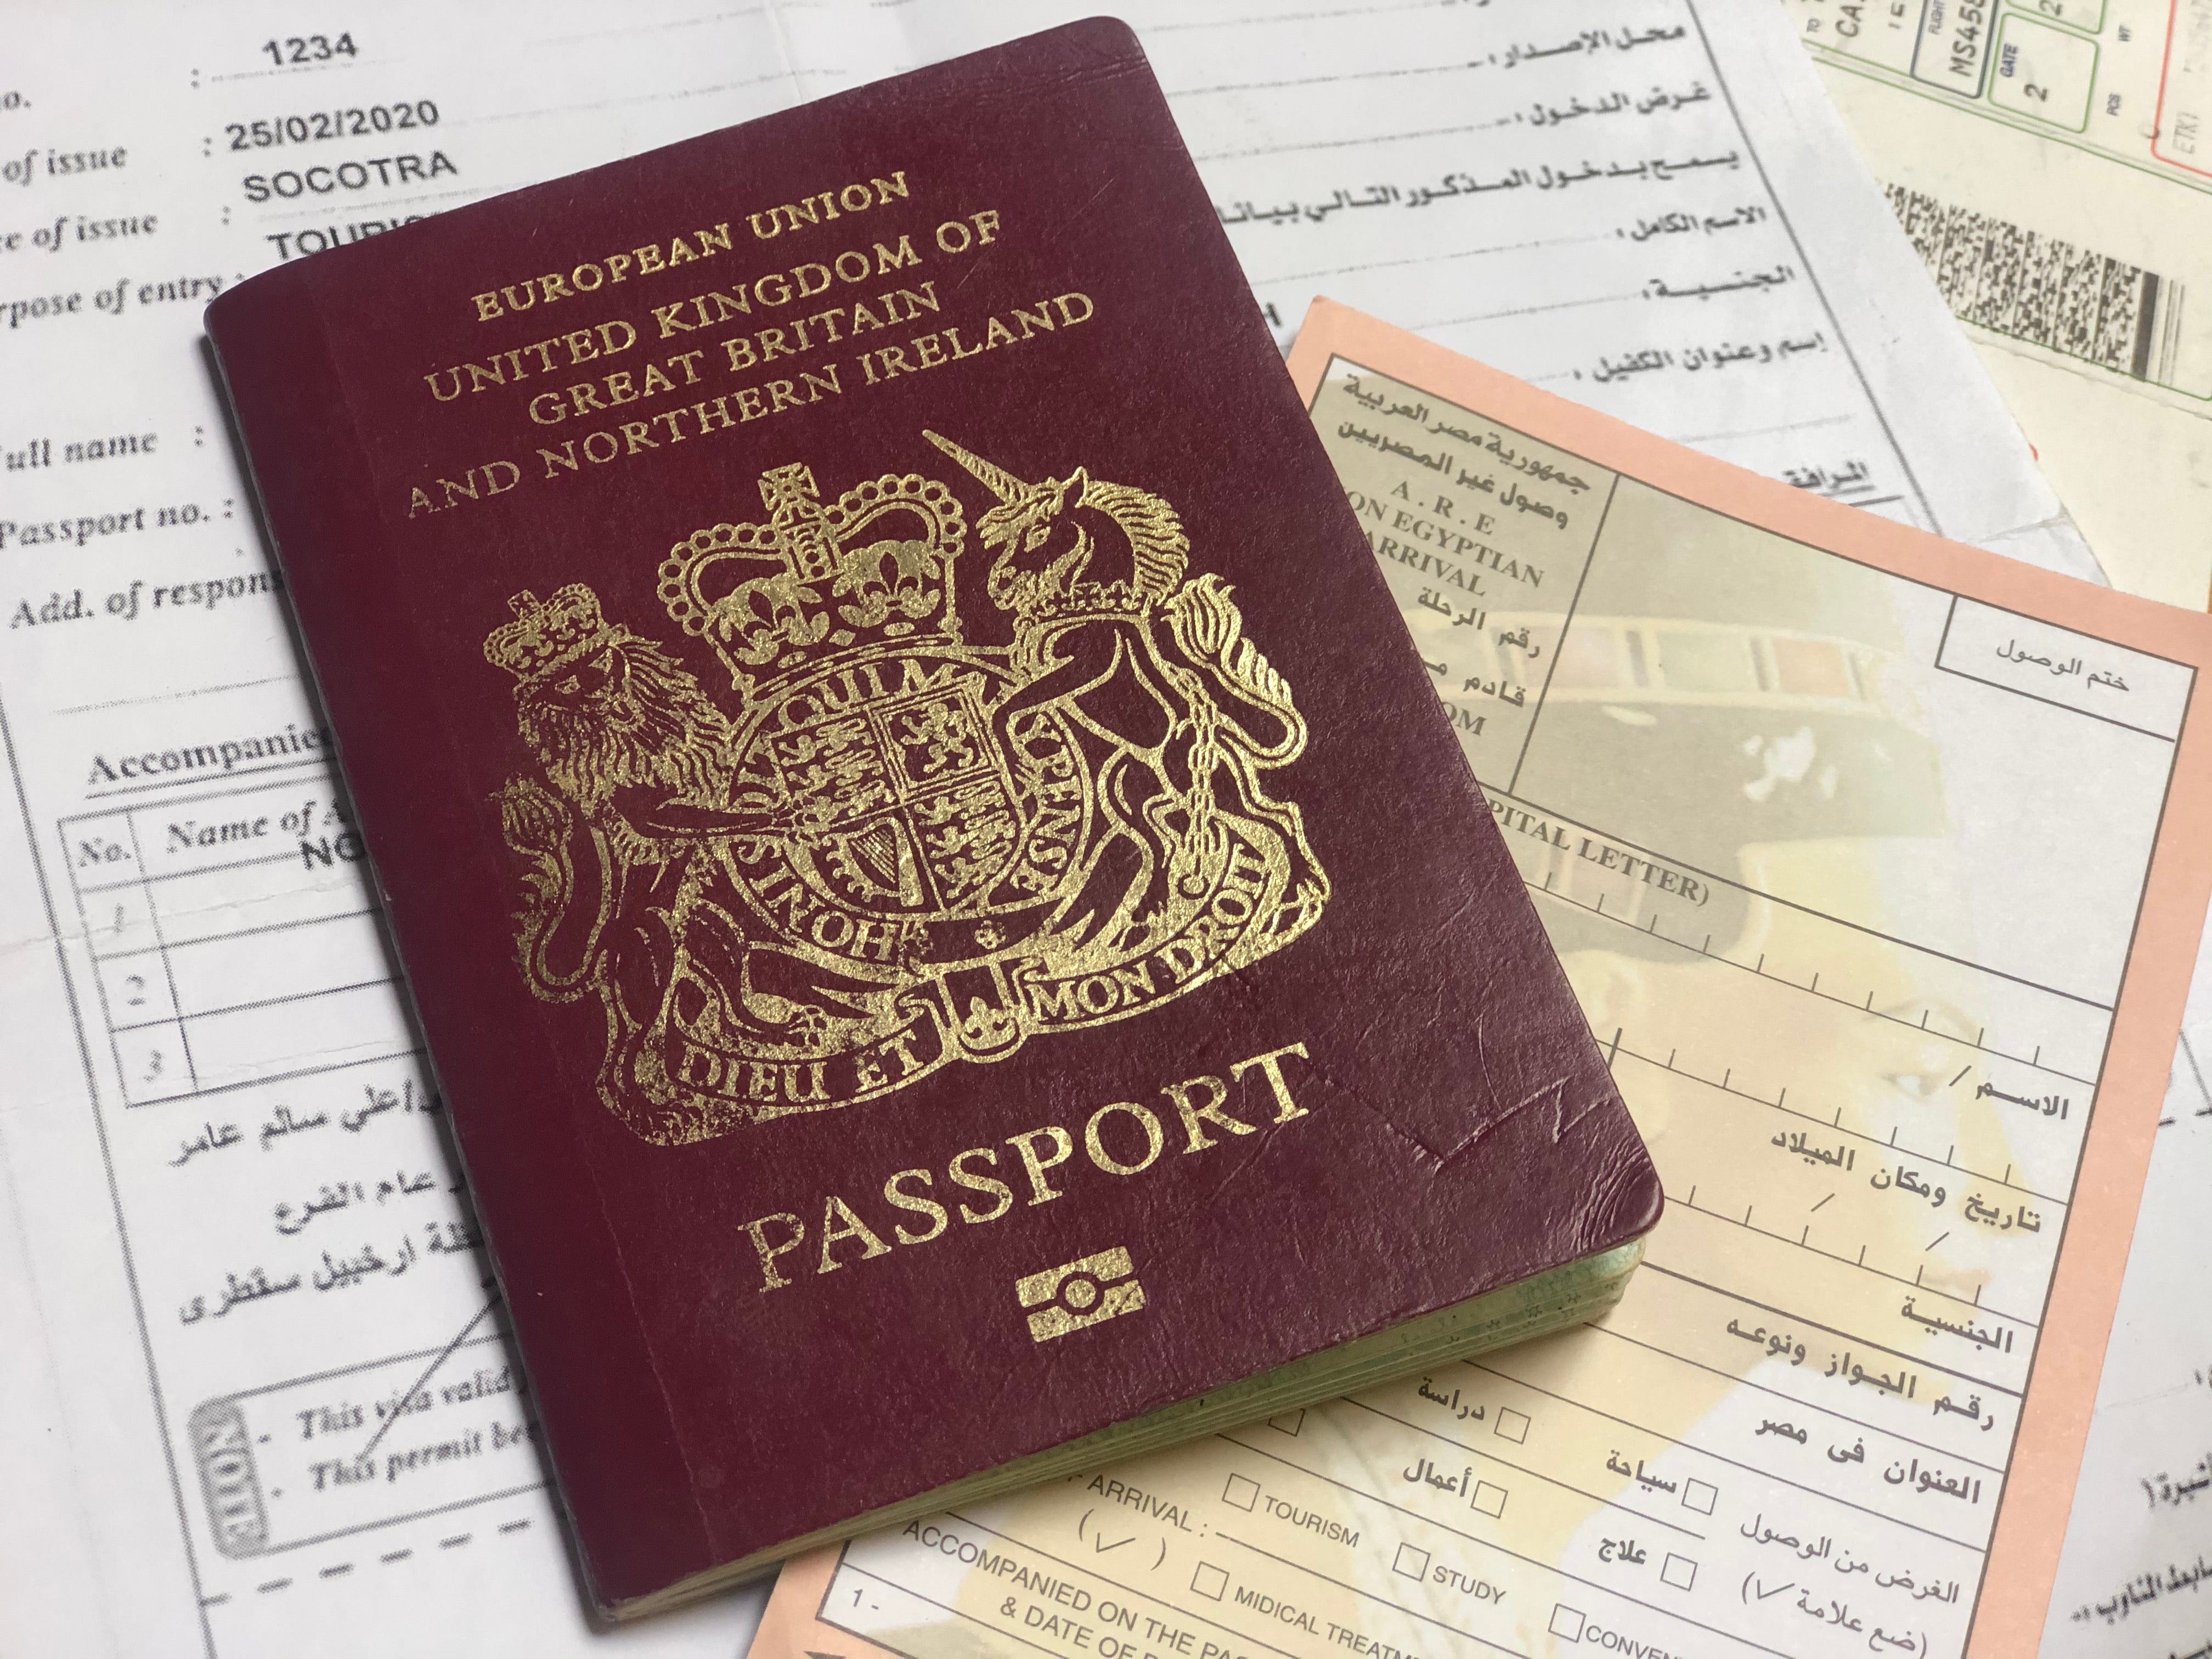 Check point: Please ensure your passport will not run out soon